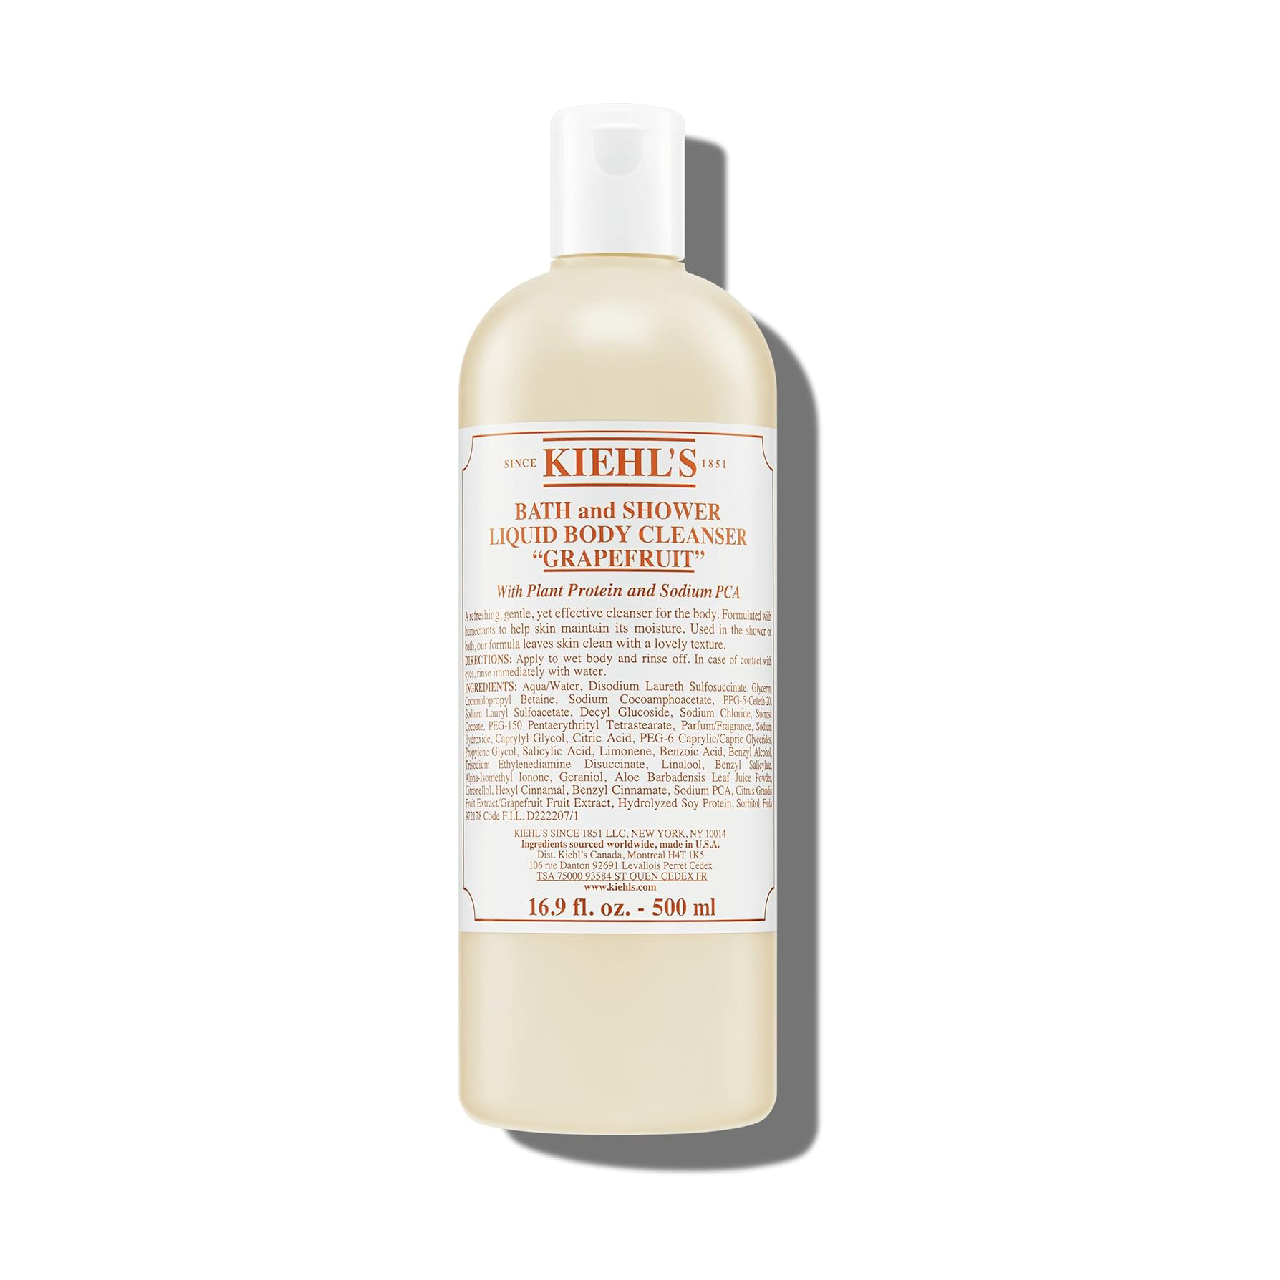 A bottle of Kiehl's Bath and Shower Liquid Body Cleanser with refreshing grapefruit and coriander.